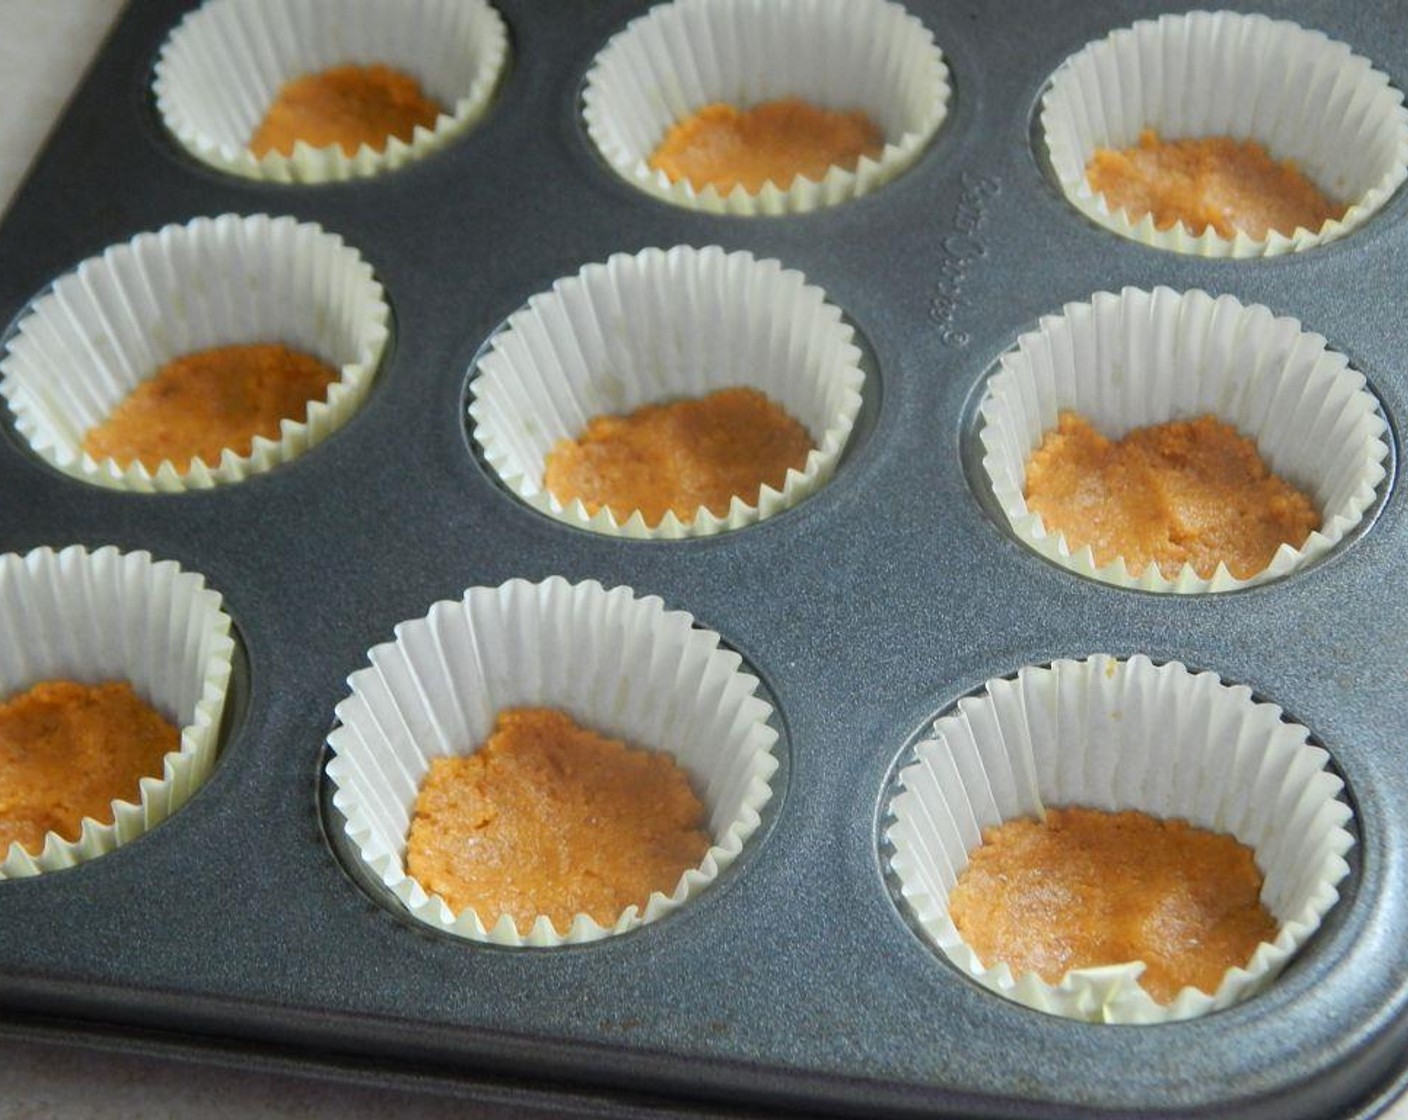 step 2 In a small bowl, mix your Graham Cracker Crumbs (1/2 cup) and Vegetable Oil Spread (1 1/2 Tbsp) together. Fill your 18 muffin cups with the crumb mixture, and pat down with your fingers.